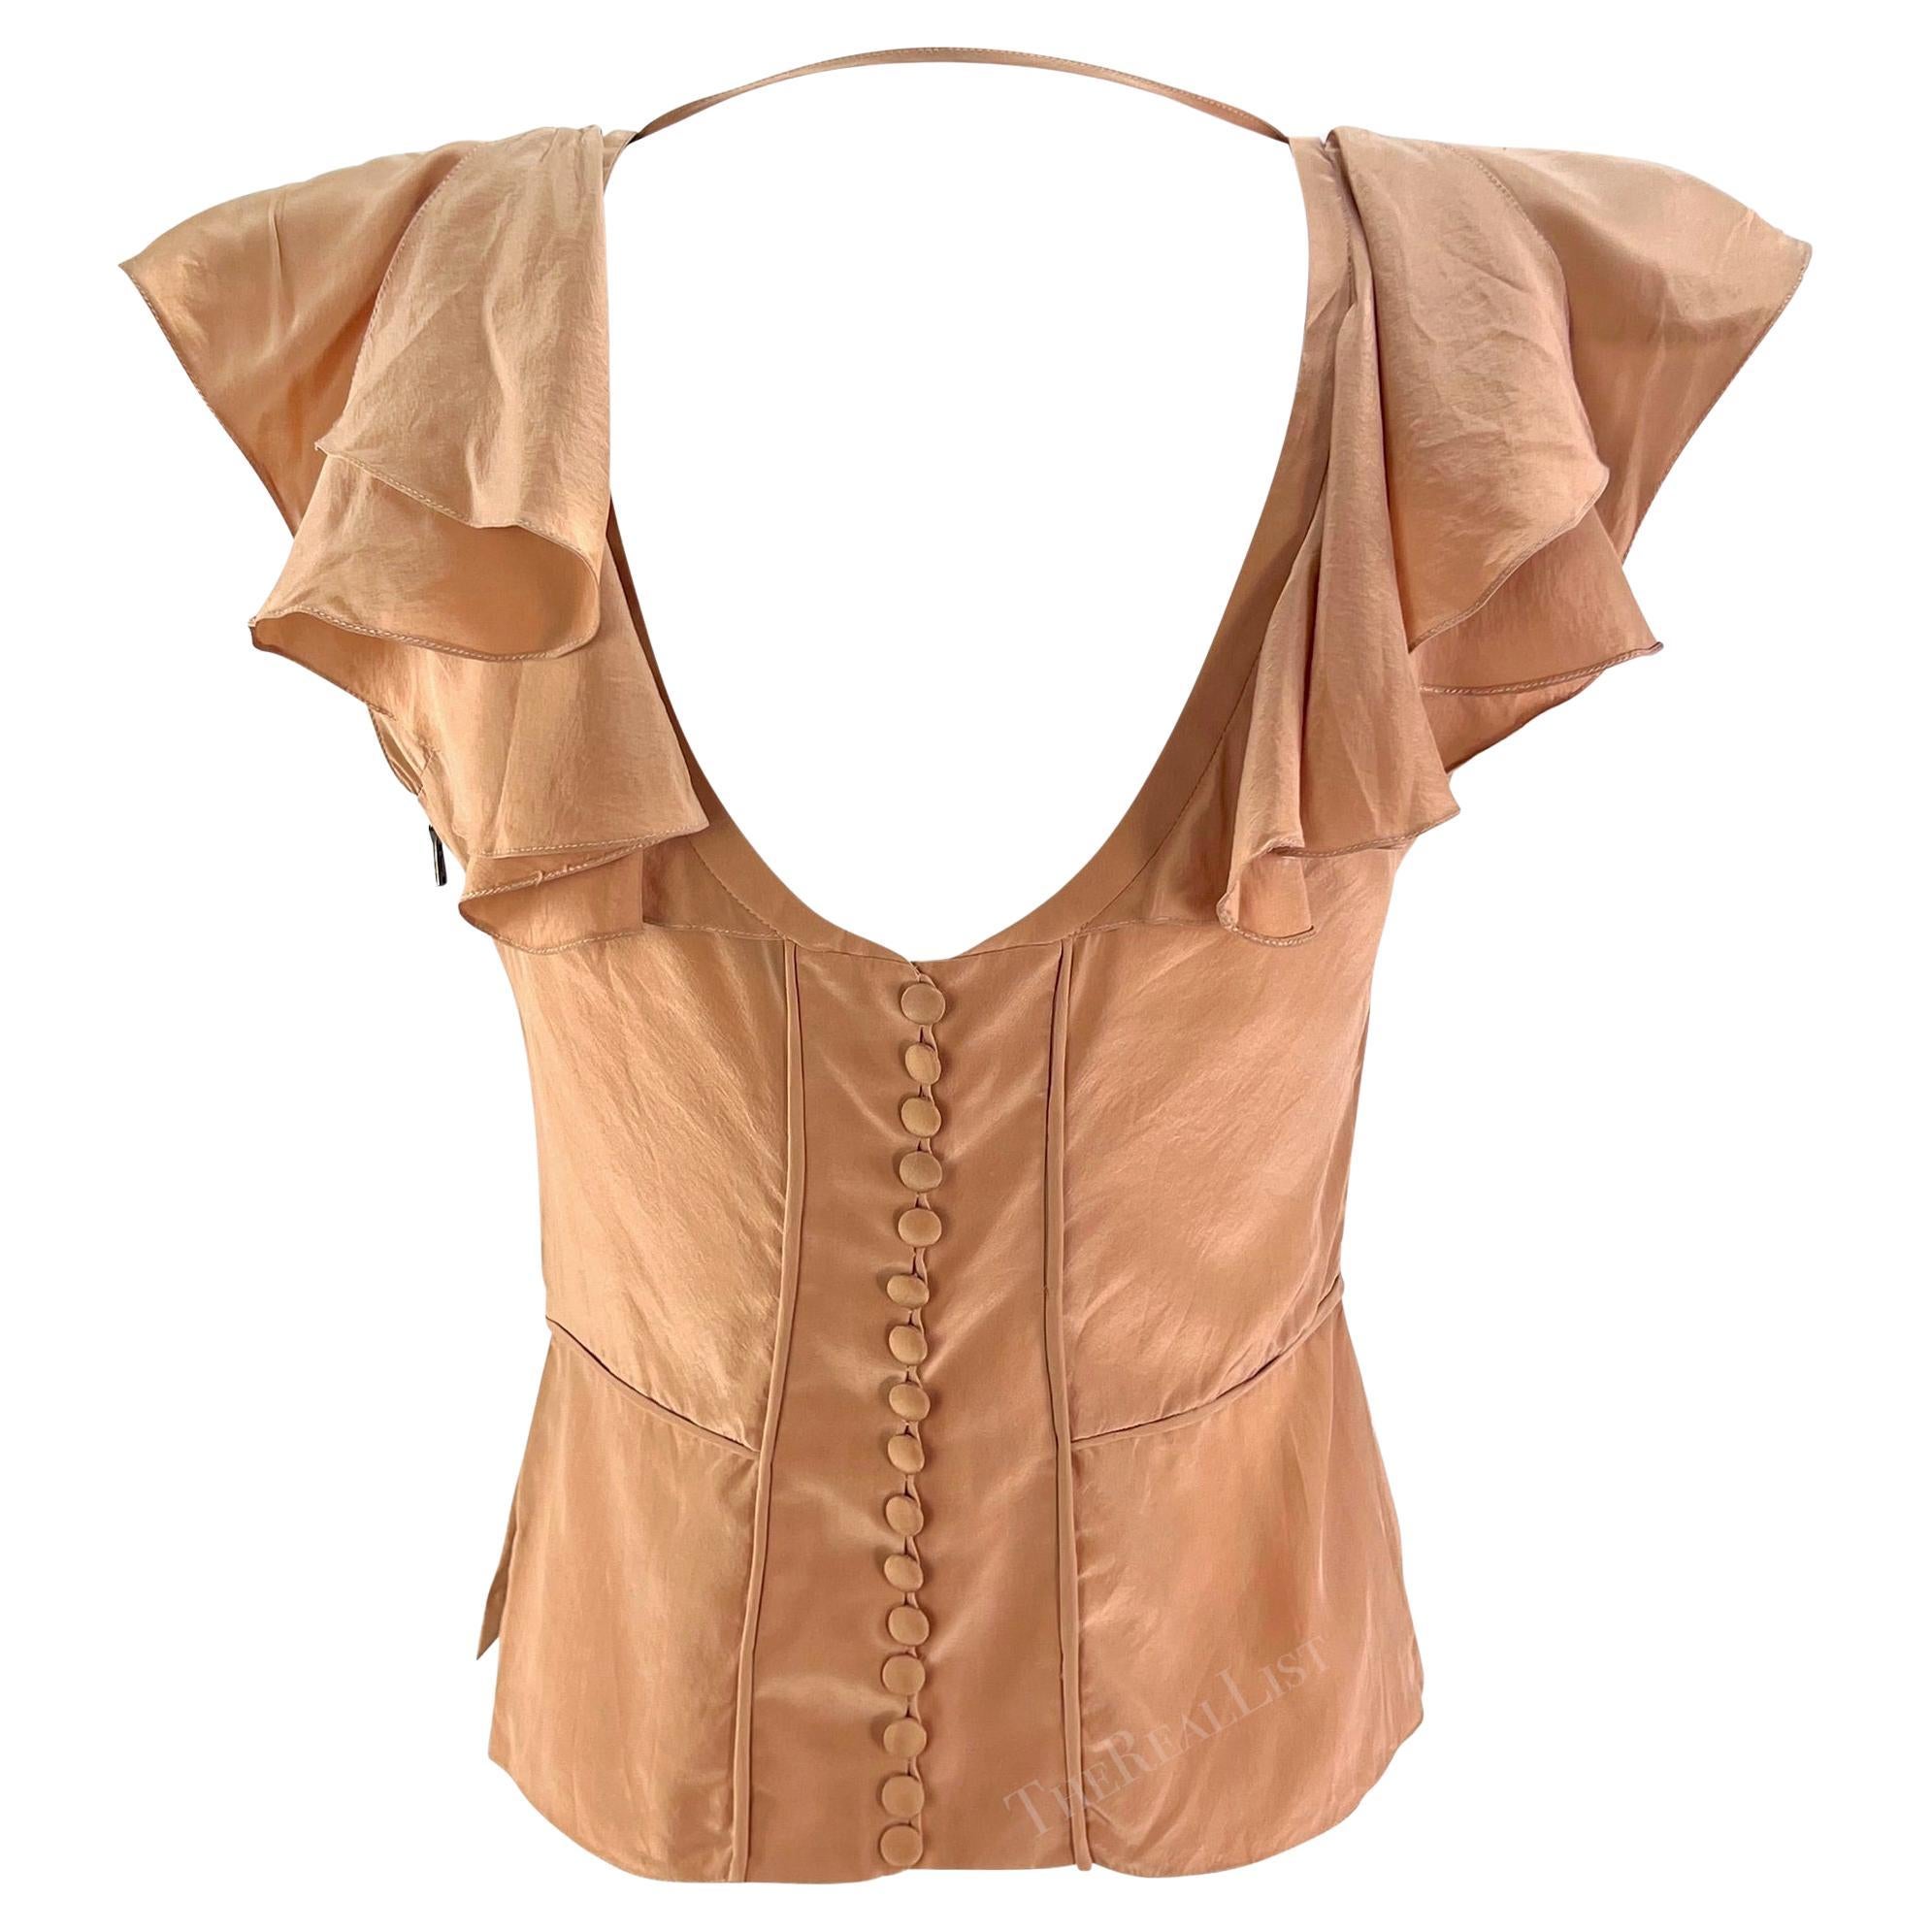 S/S 2003 Yves Saint Laurent by Tom Ford Beige Silk Floral Ruffle Top For Sale 2